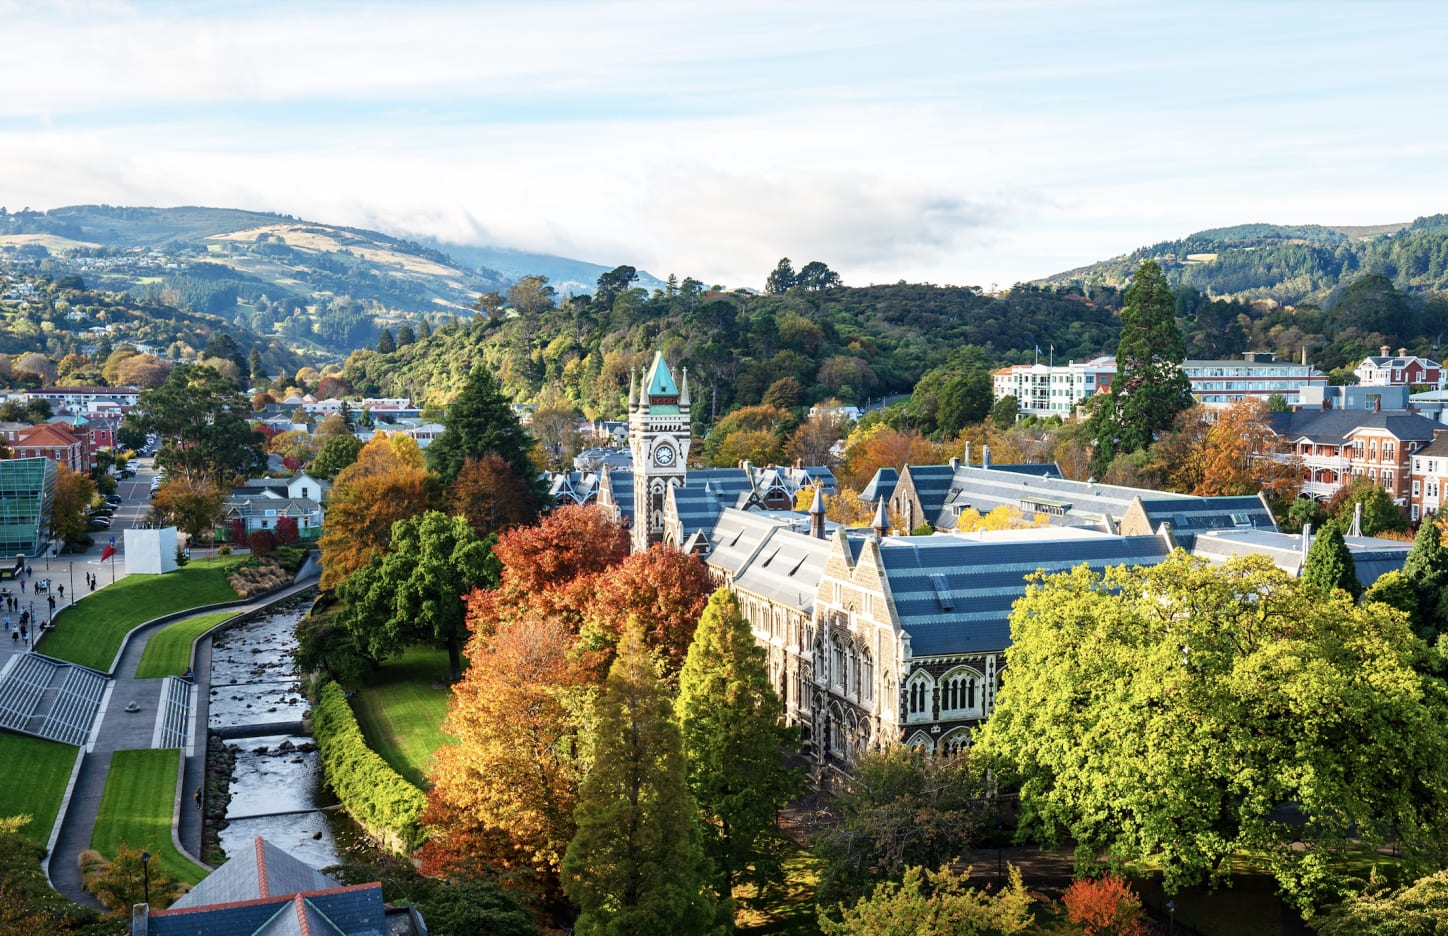 University of Otago Bachelor of Arts (BA) Majoring in Tourism, Languages and Cultures